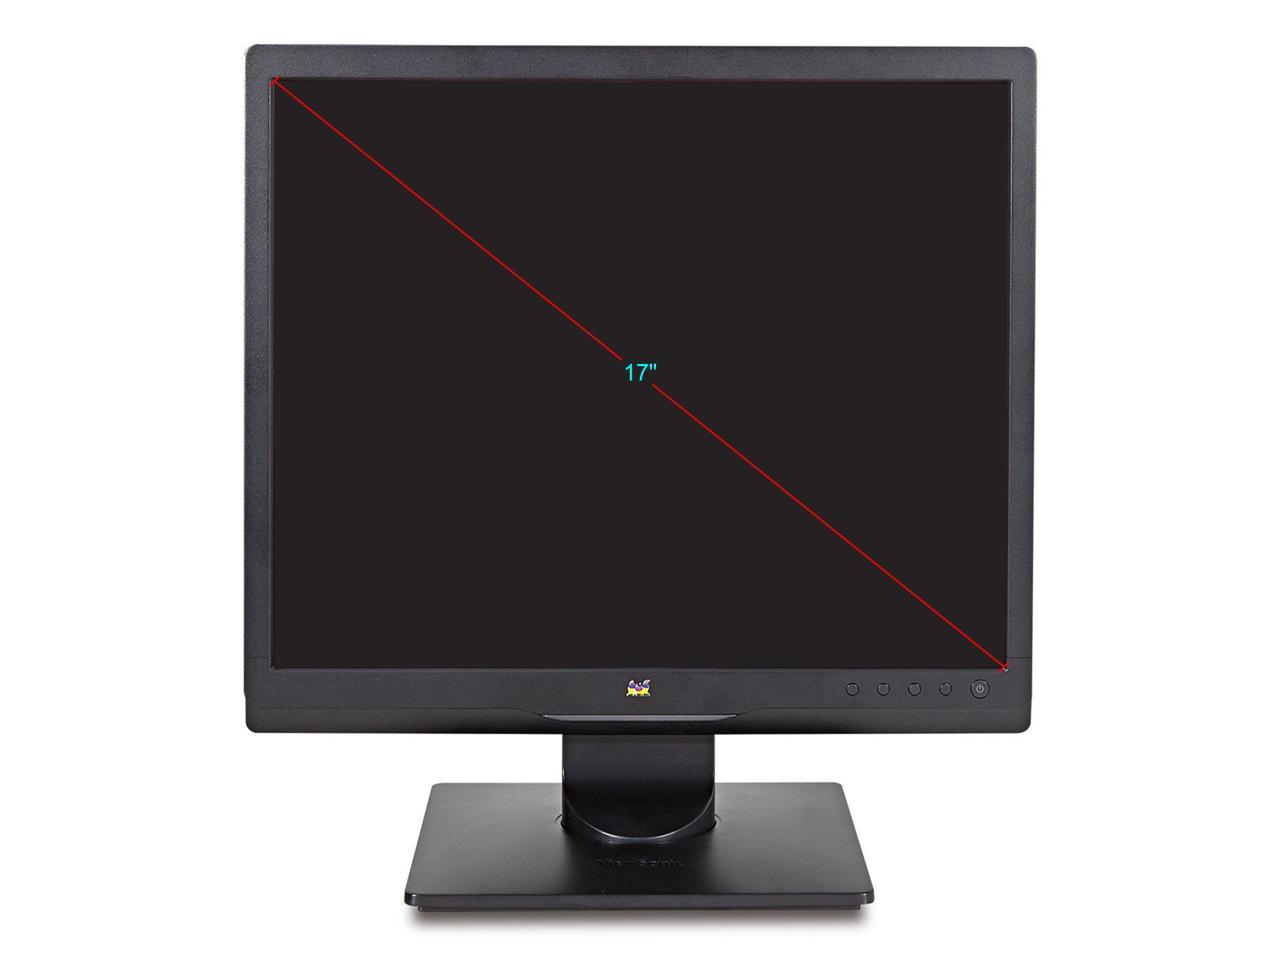 Viewsonic VA708a 17" LED-Backlit LCD Monitor w/ Eco-Mode & sRGB Color Correction